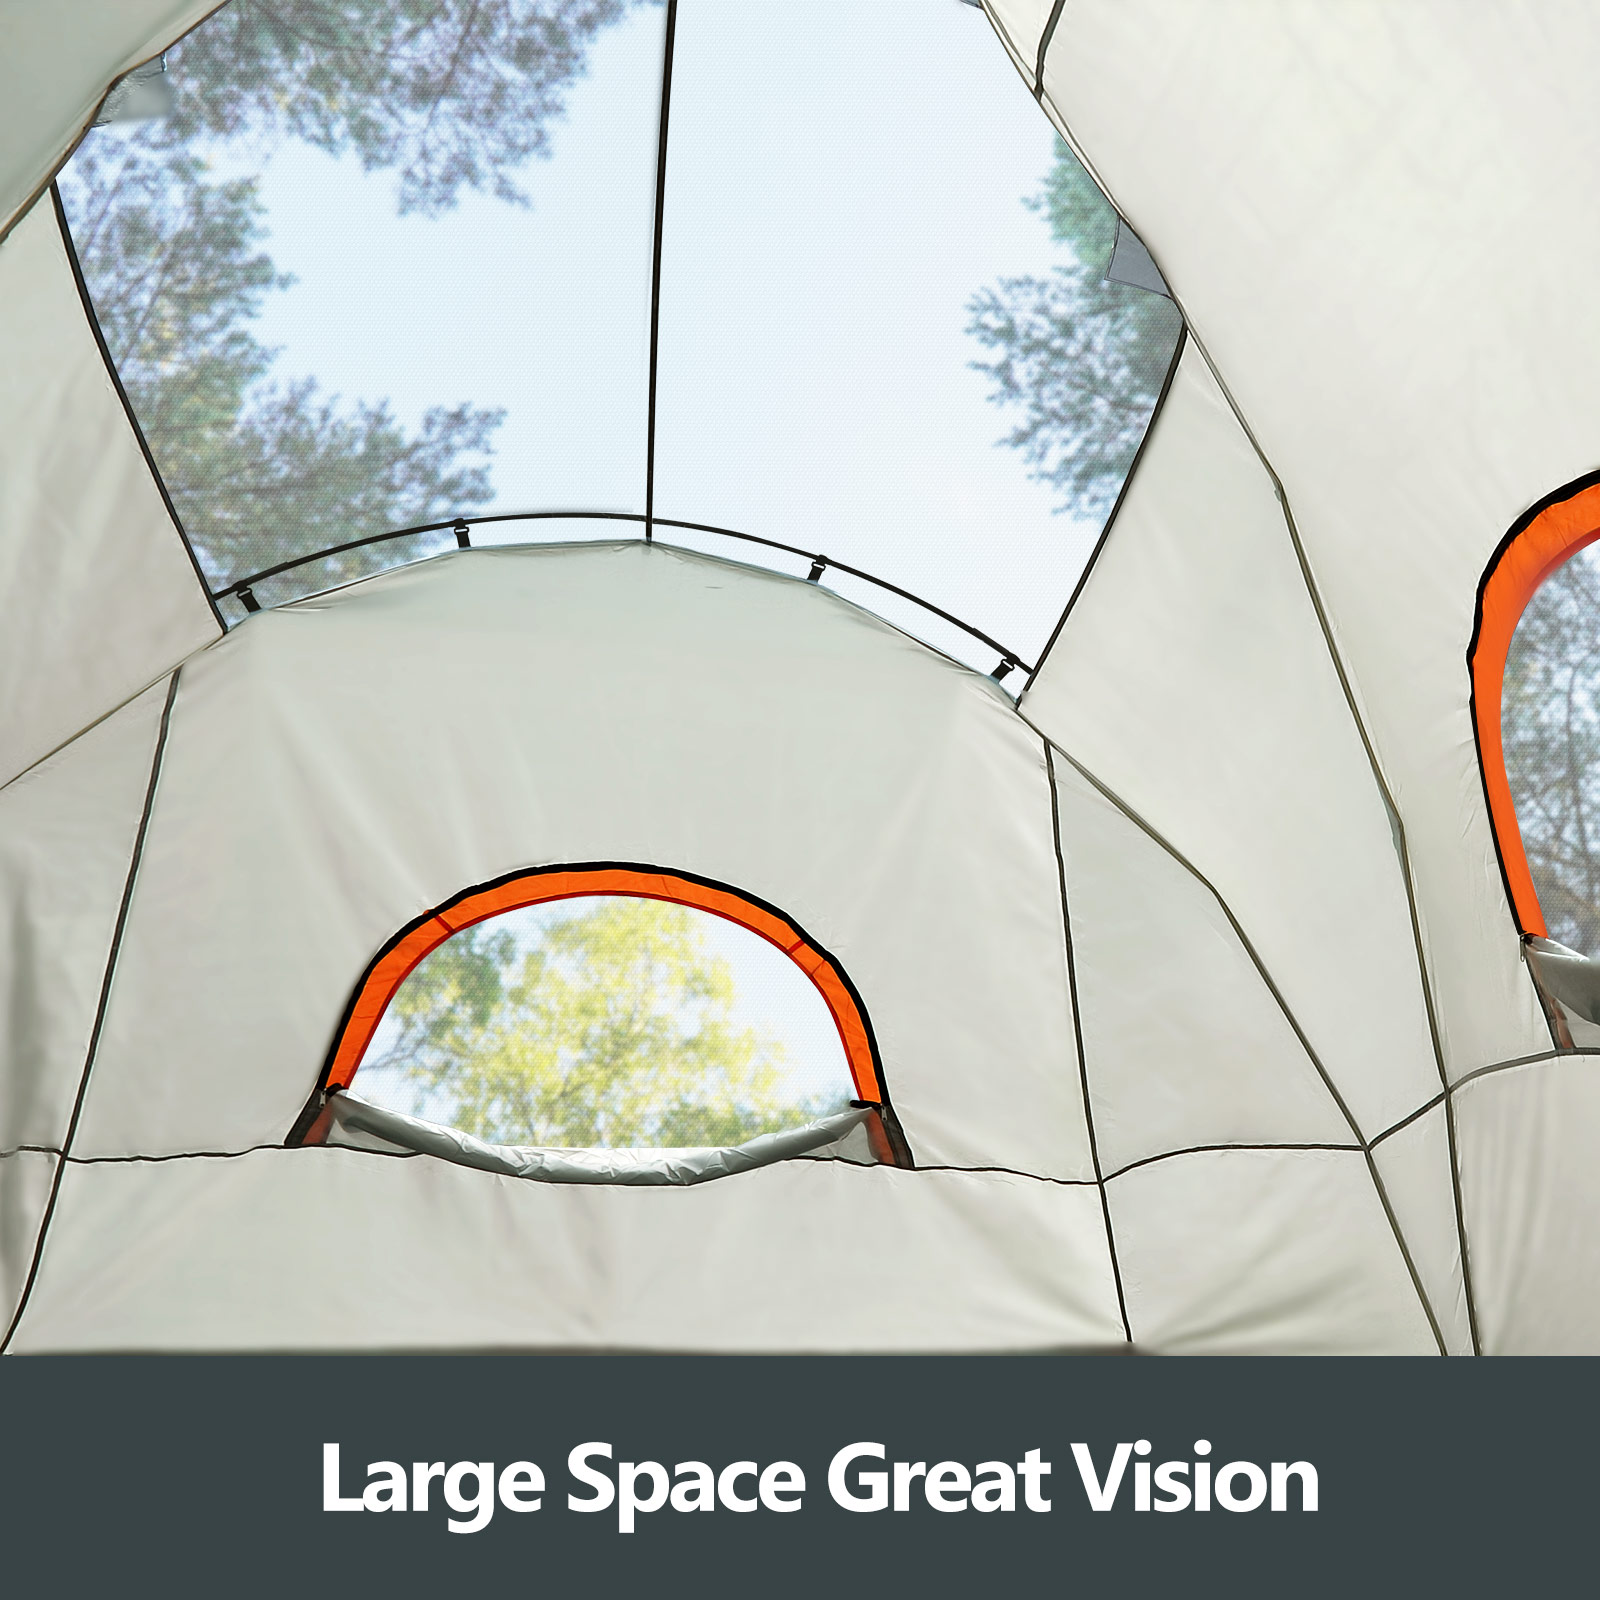 10-Person Family Camping Tent